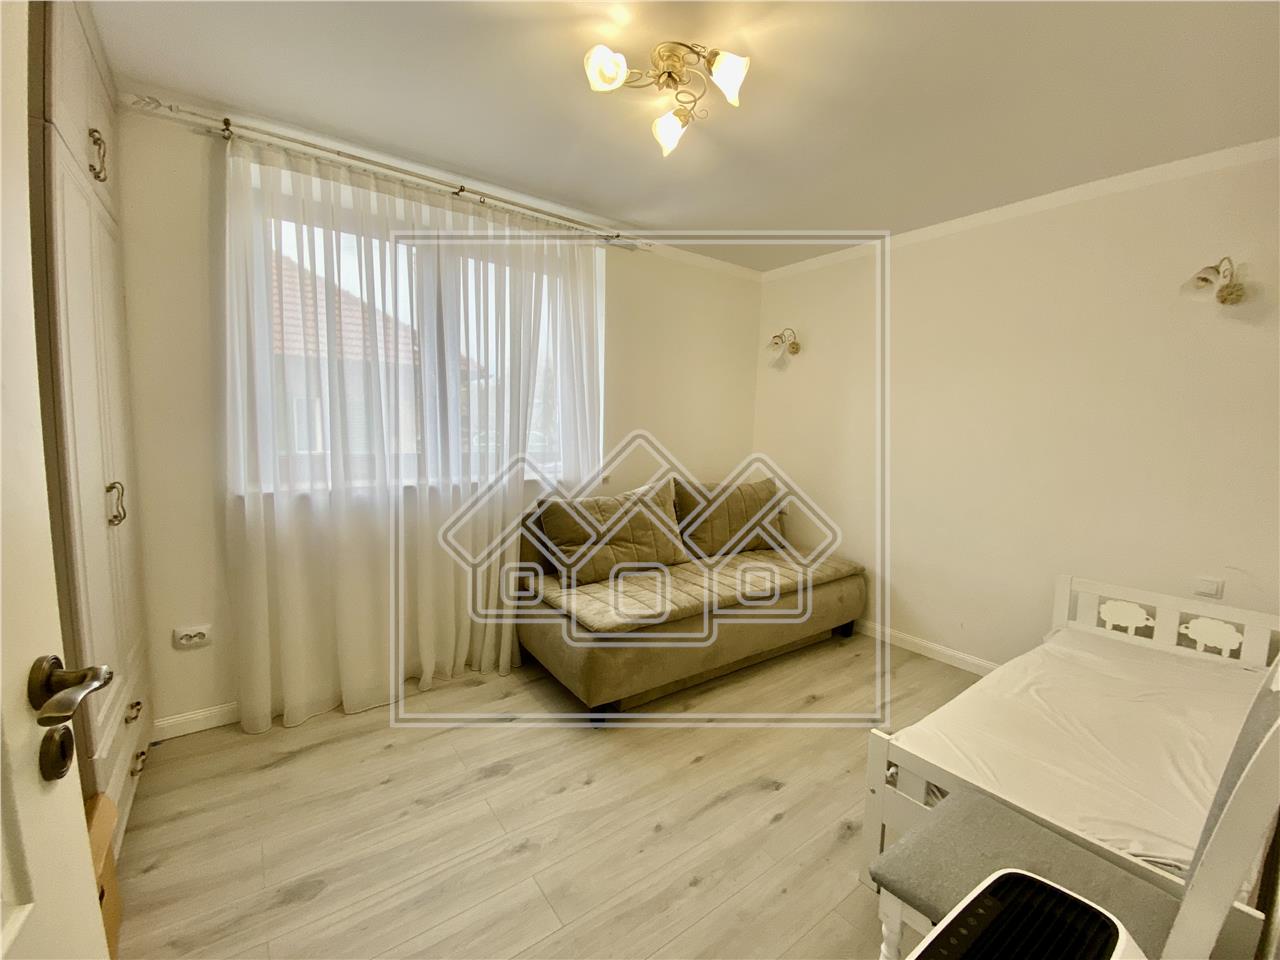 House for sale in Sibiu - 4 apartments - land 640 sqm - Lazaret area